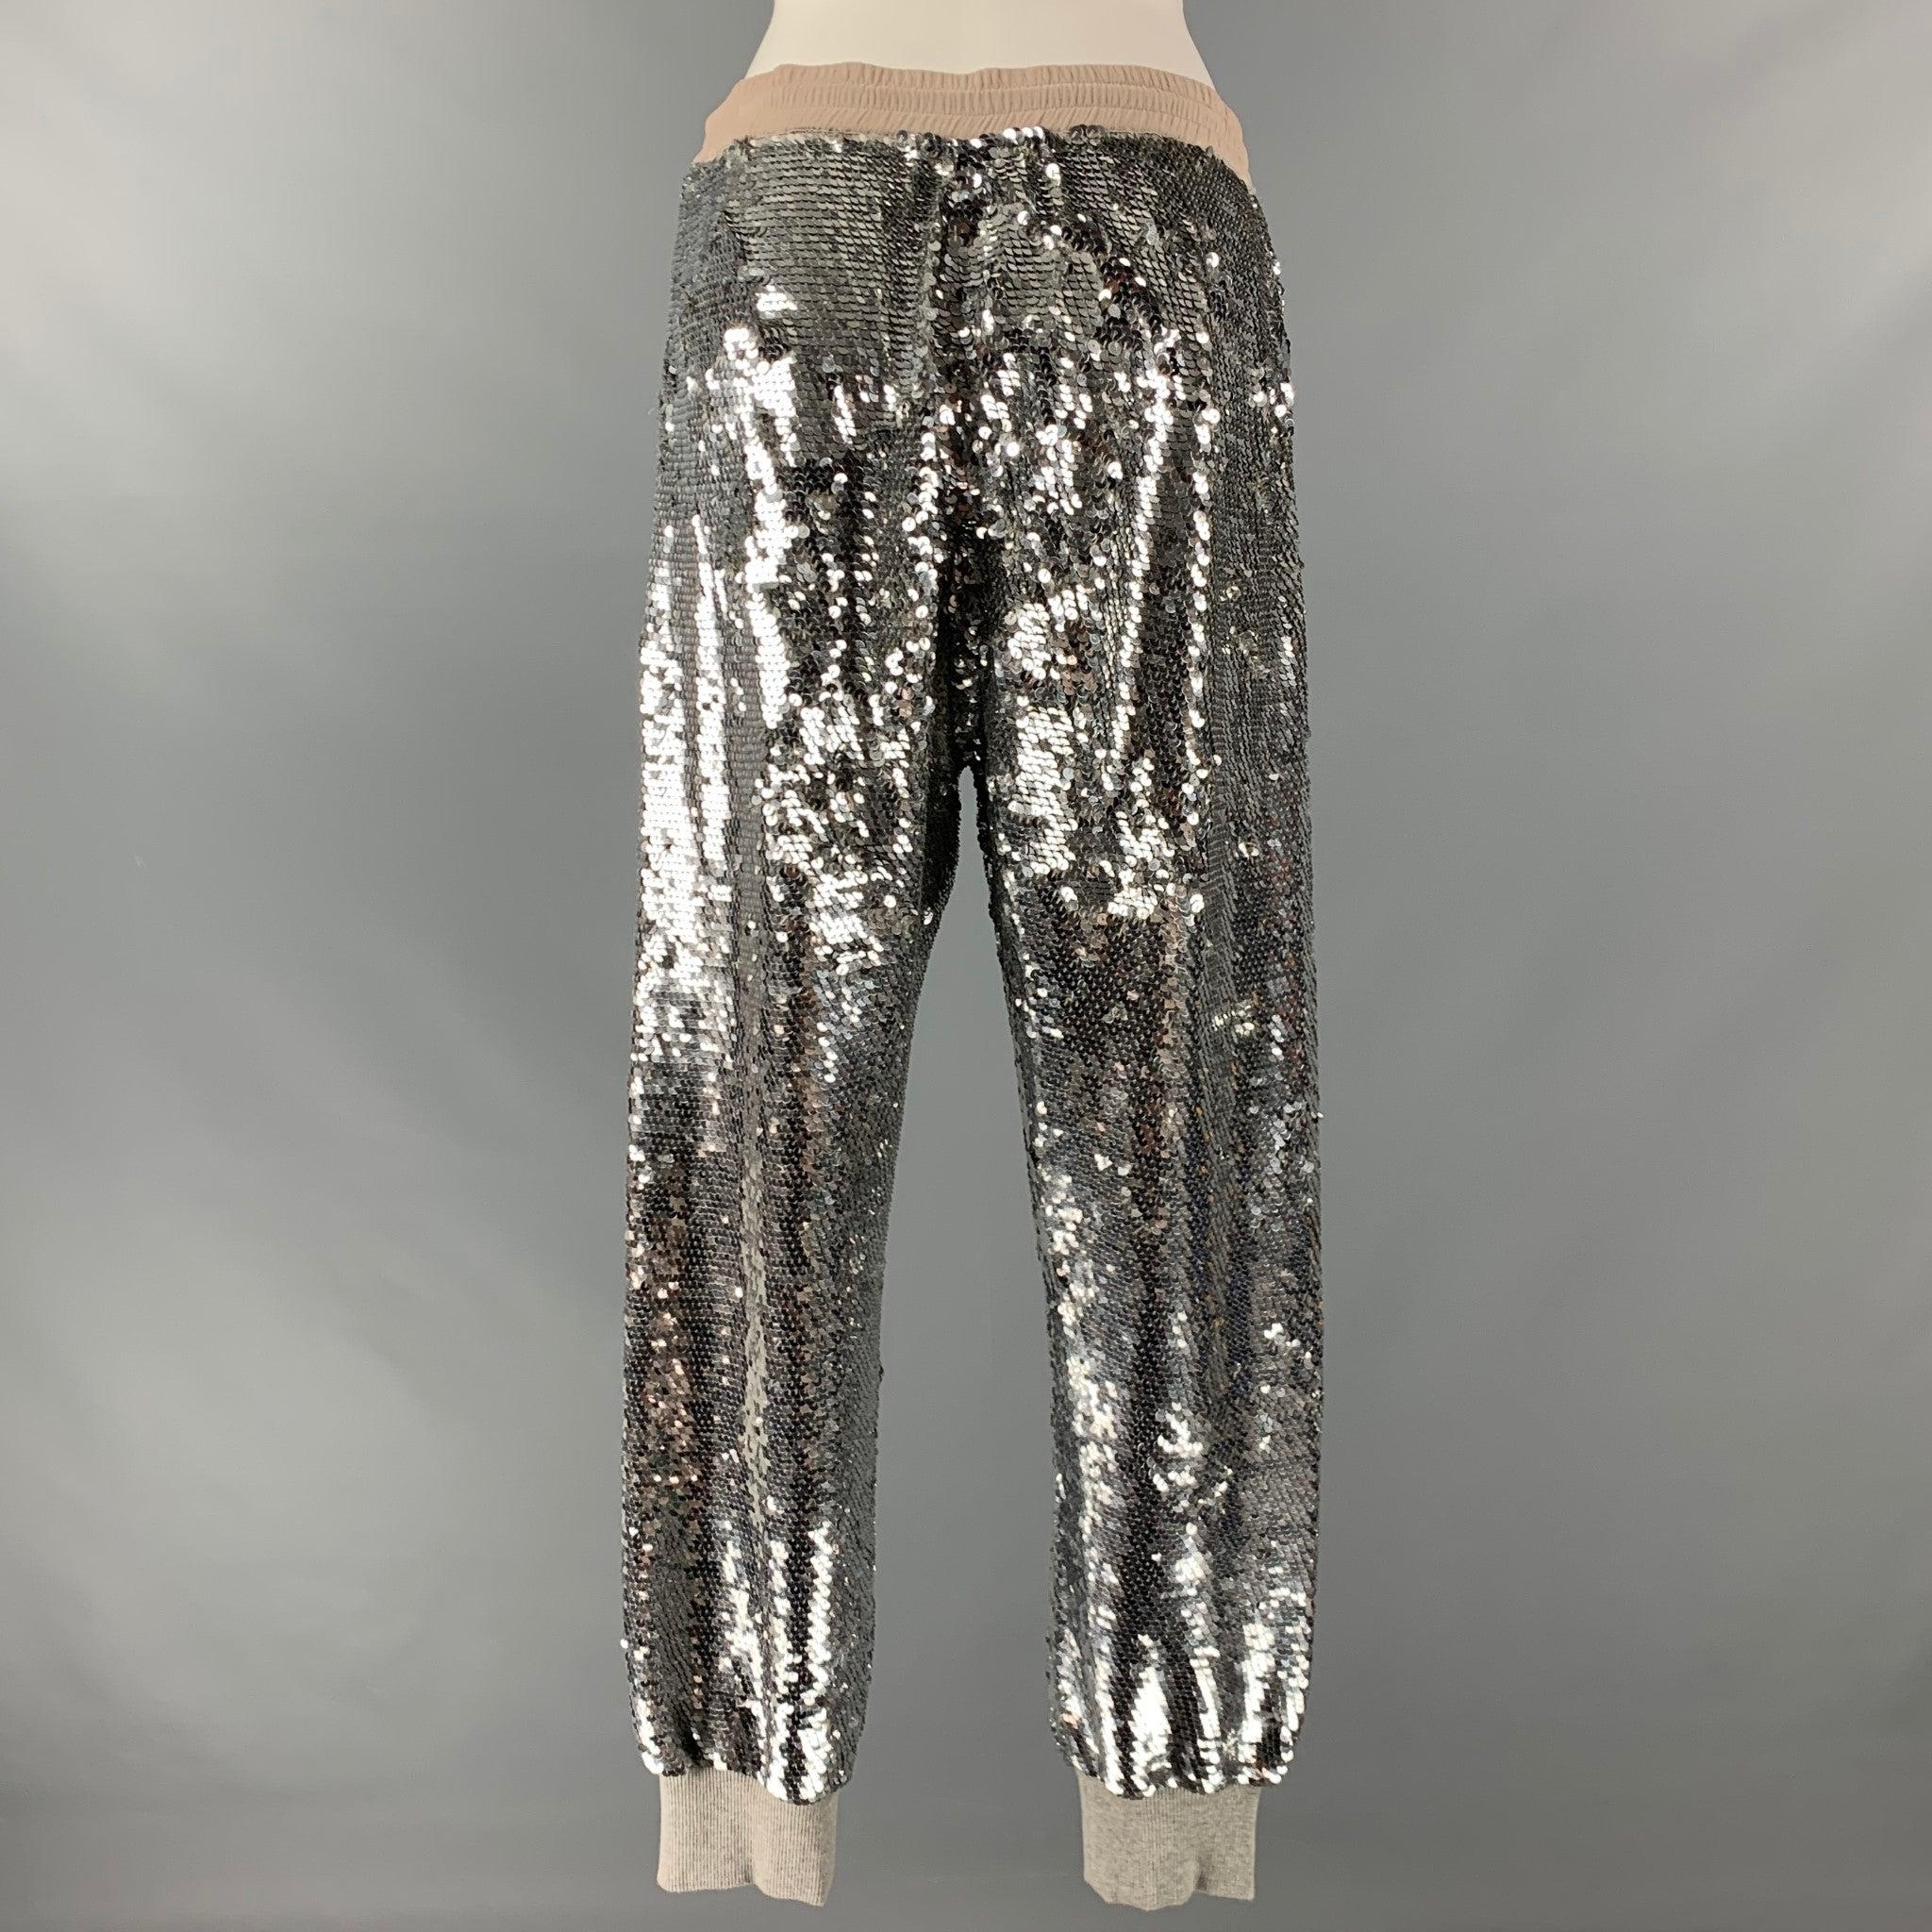 ASHISH pants comes in a silver sequined silk featuring a elastic waist, elastic cuffs, zipper pockets, and a drawstring detail. Embroidered by hand.Very Good Pre-Owned Condition. 

Marked:   M 

Measurements: 
  Waist: 29 inches Rise: 13 inches